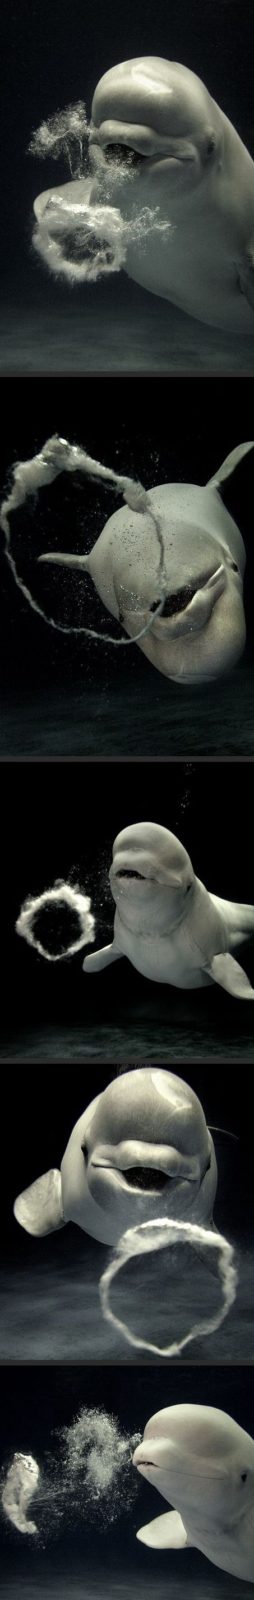 beluga whales blowing bubbles